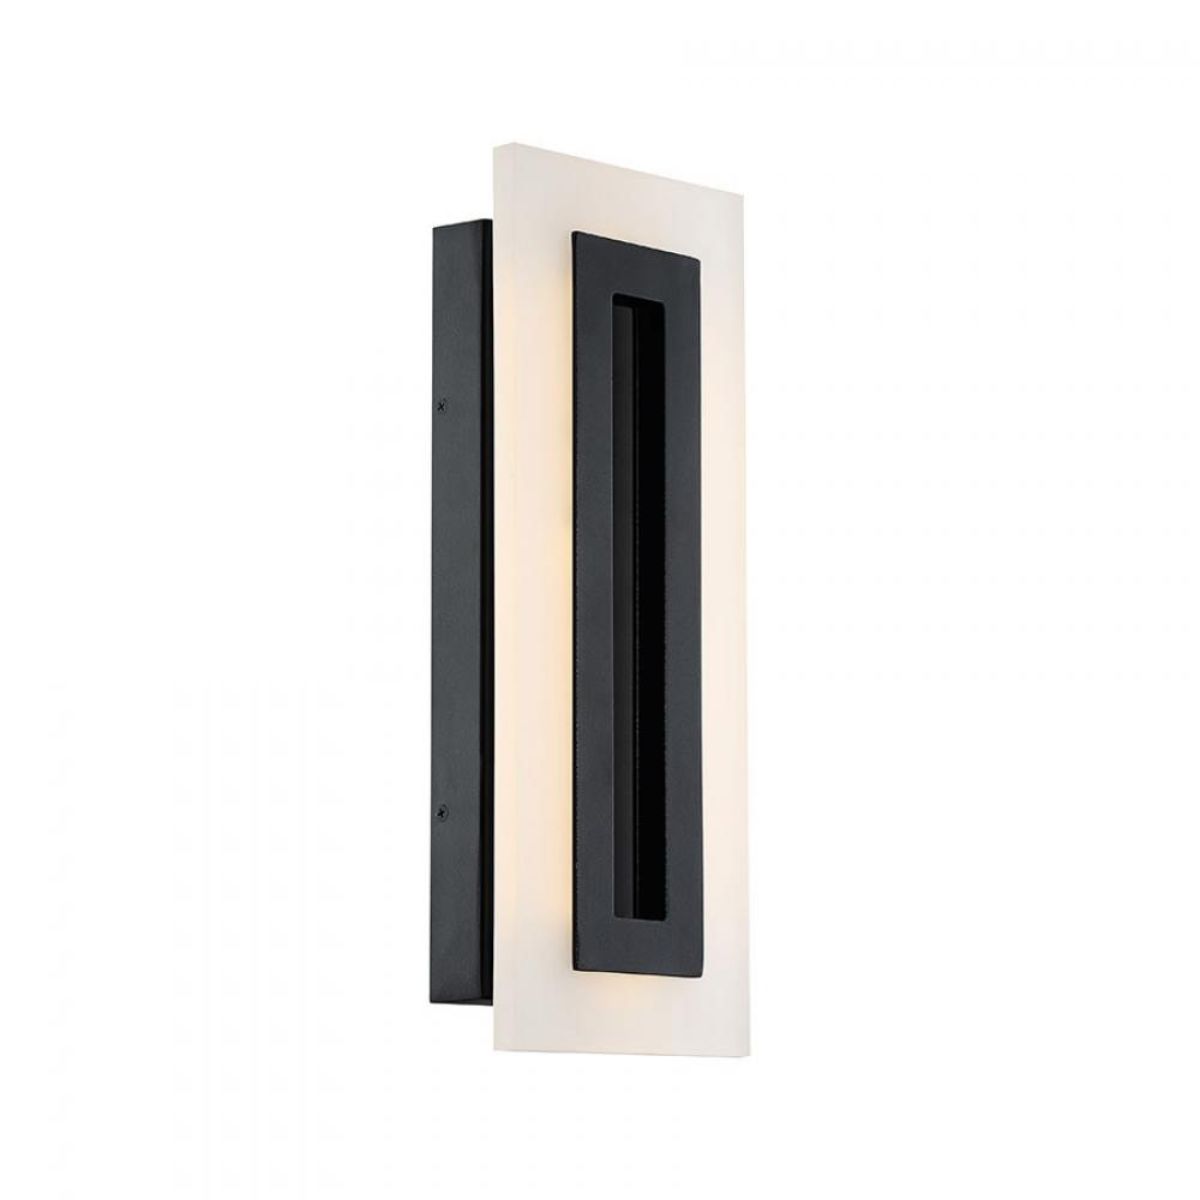 Shadow 17 In. LED Outdoor Wall Sconce 722 lumens Black Finish